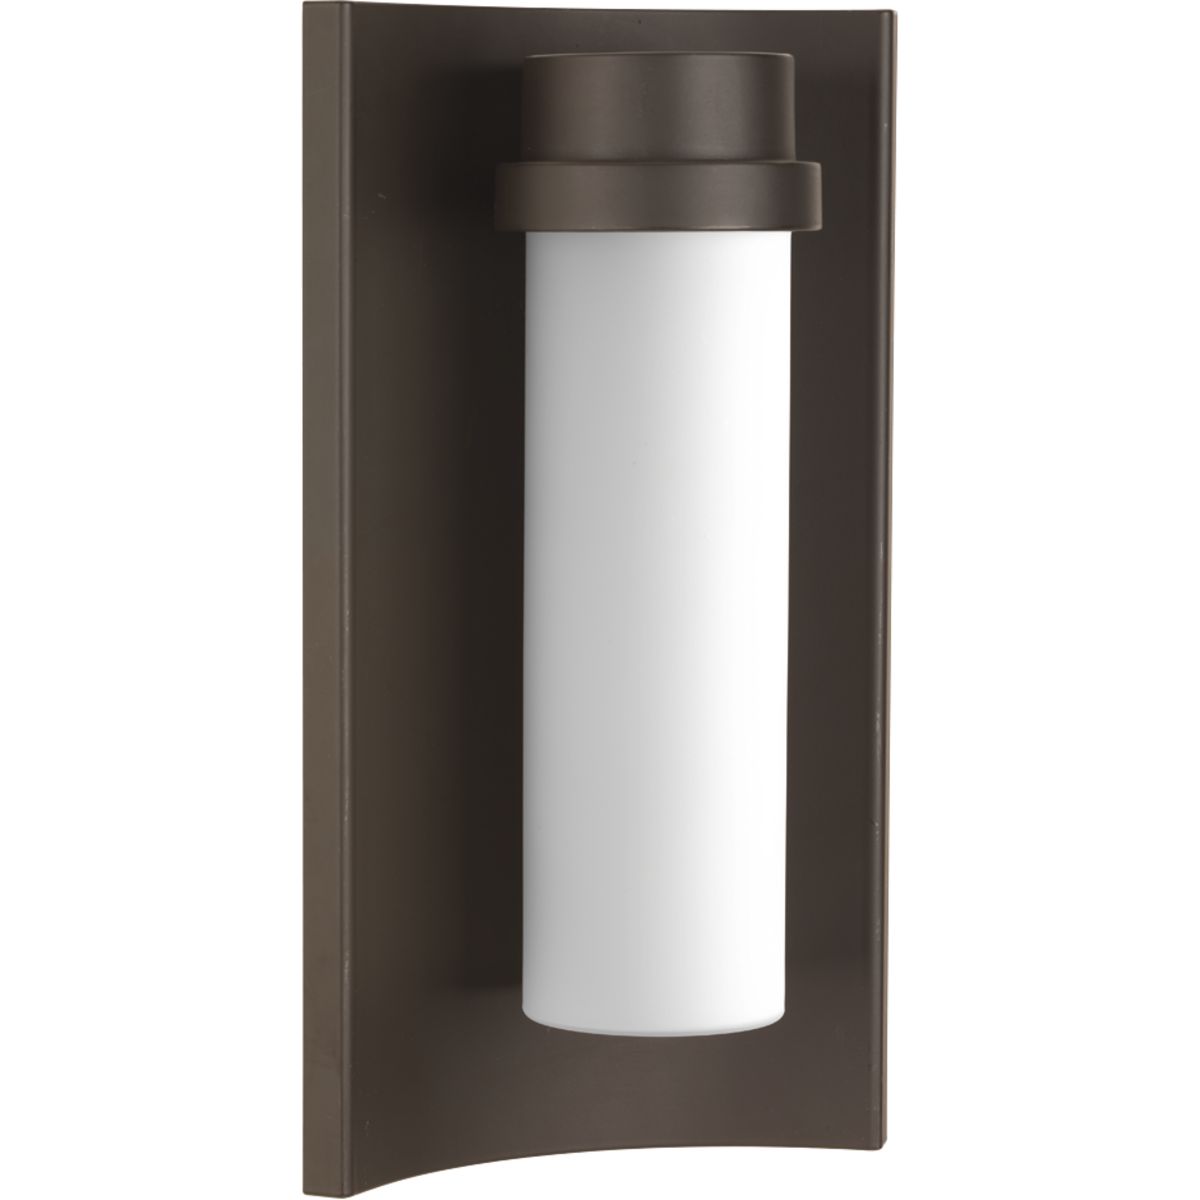 A modern outdoor sconce with white glass shade is suspended in a curved frame that serves as a reflector when illuminated. Finished in Architectural Bronze.